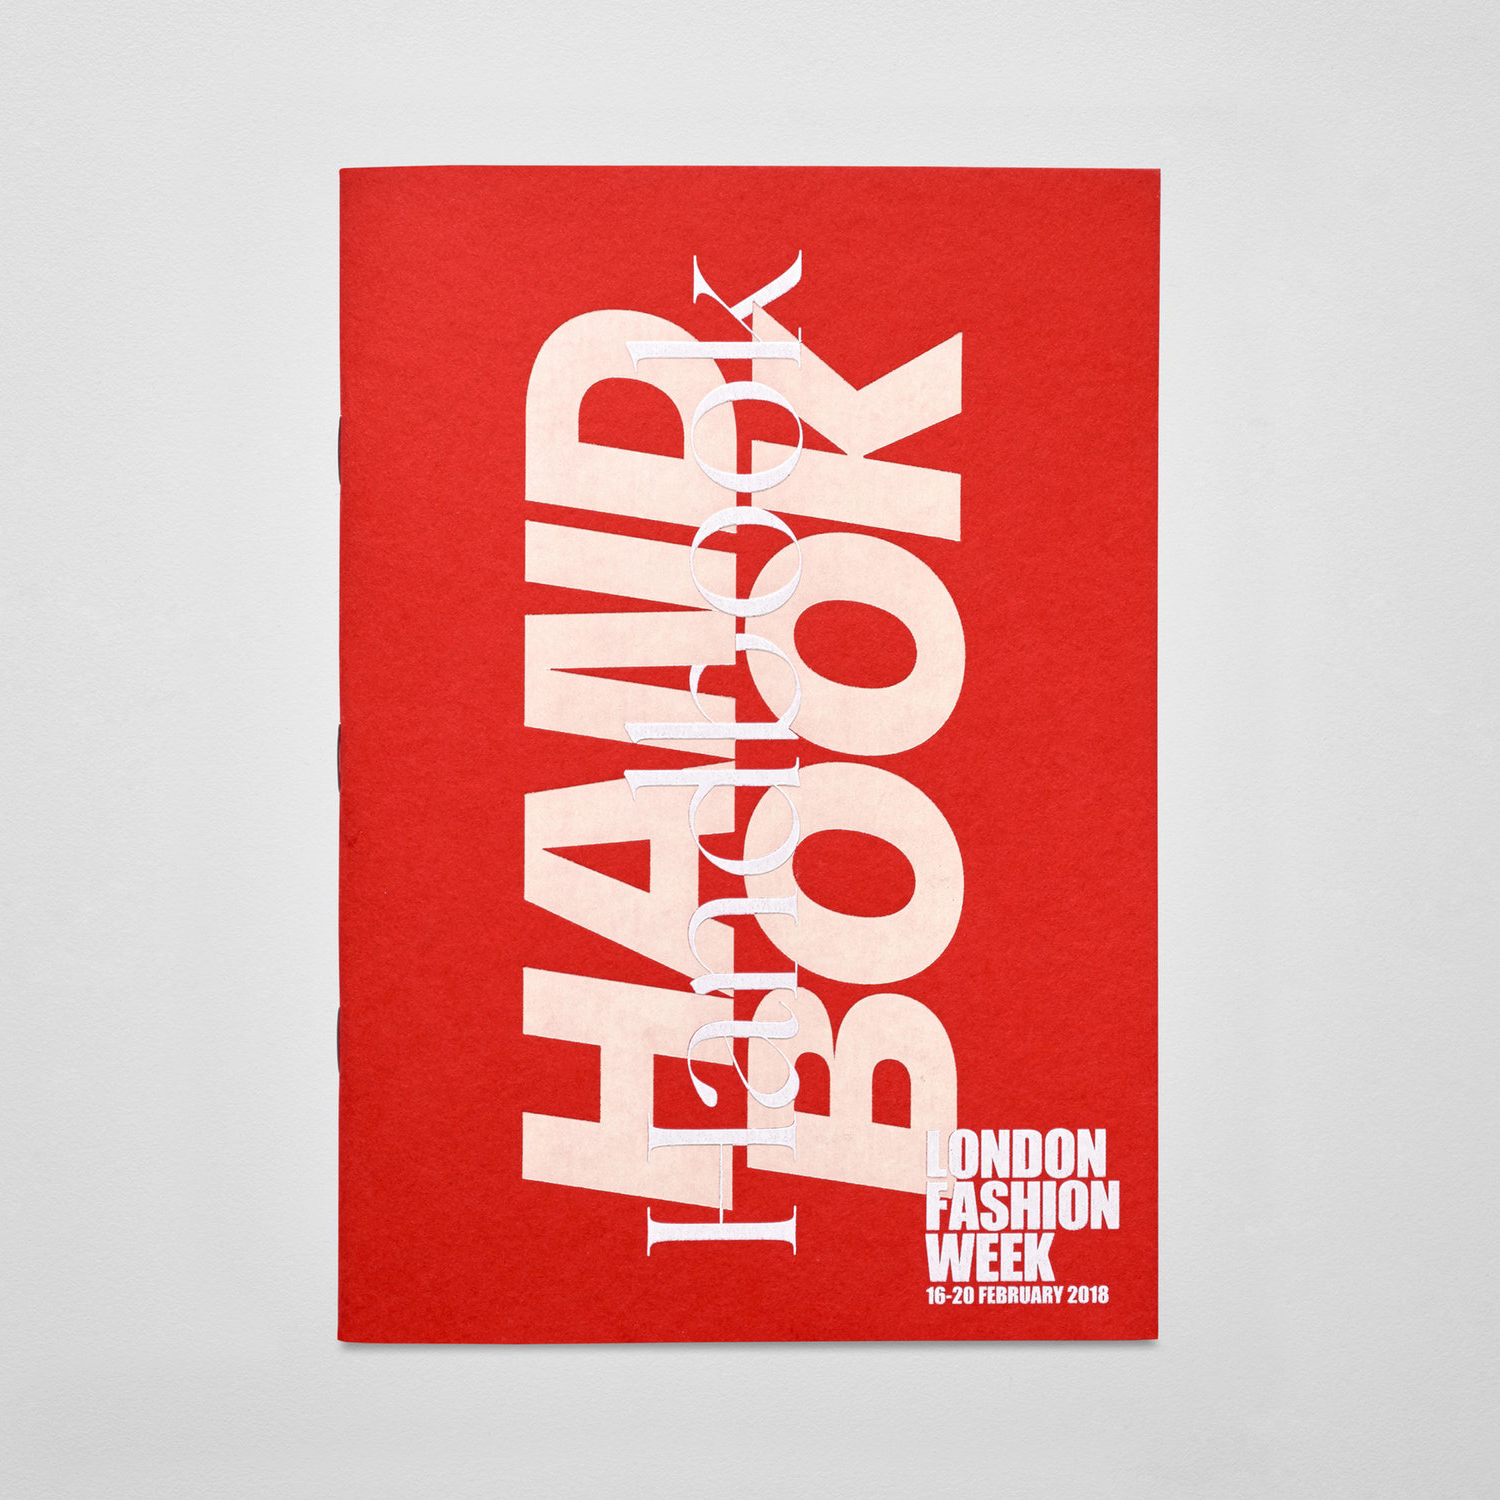 Graphic identity and handbook for London Fashion Week by Pentagram